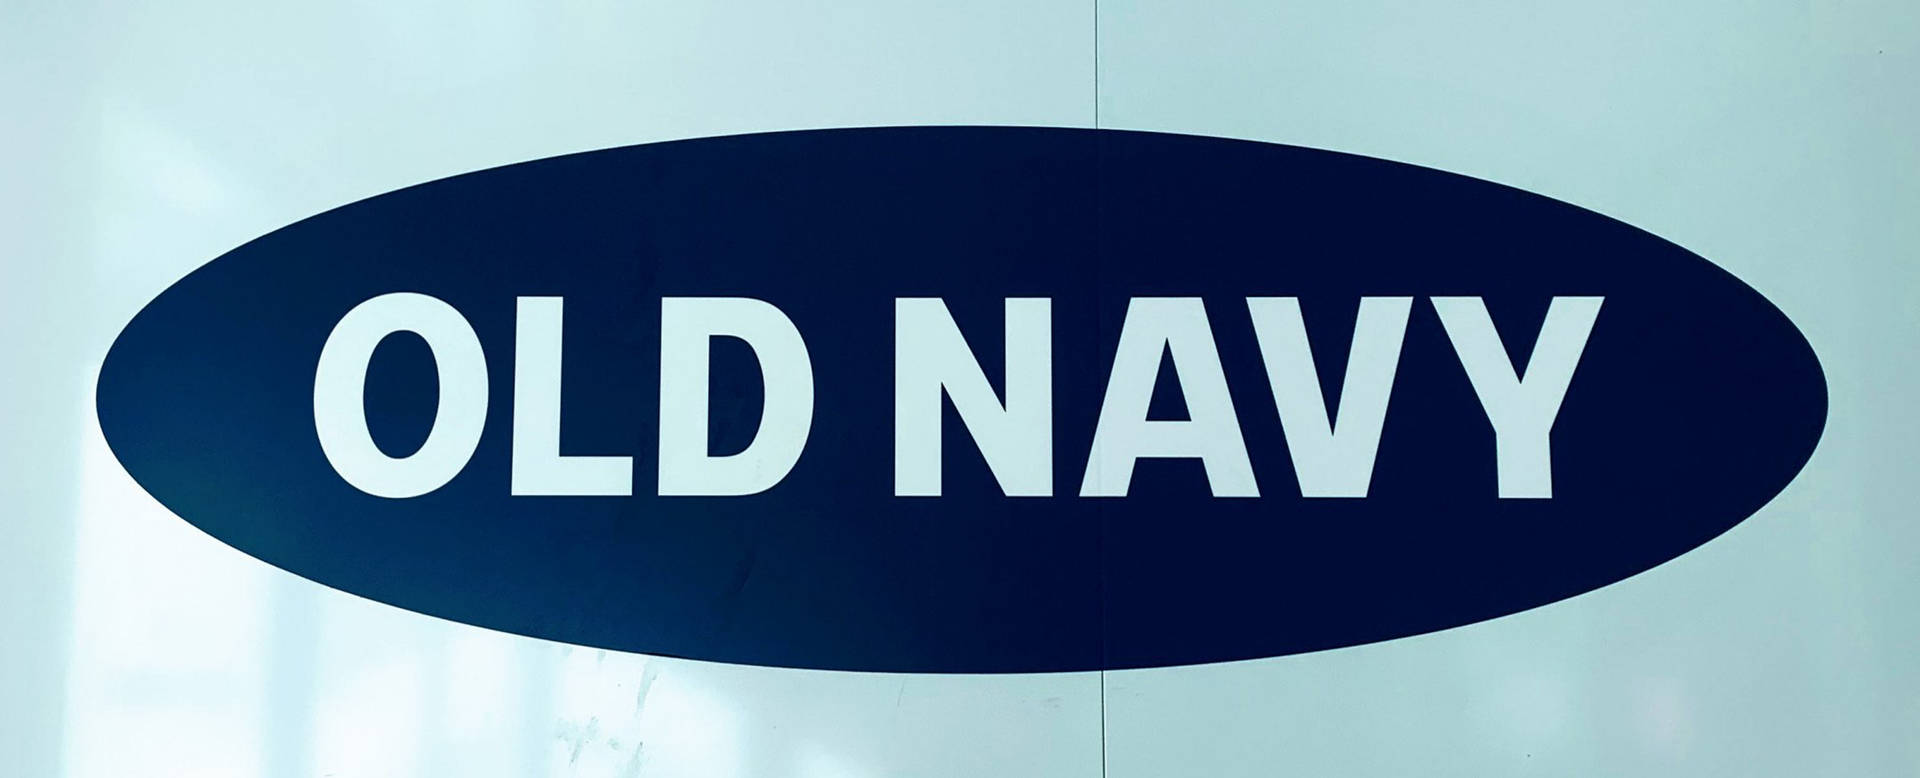 Old Navy Town Square Nevada Wallpaper